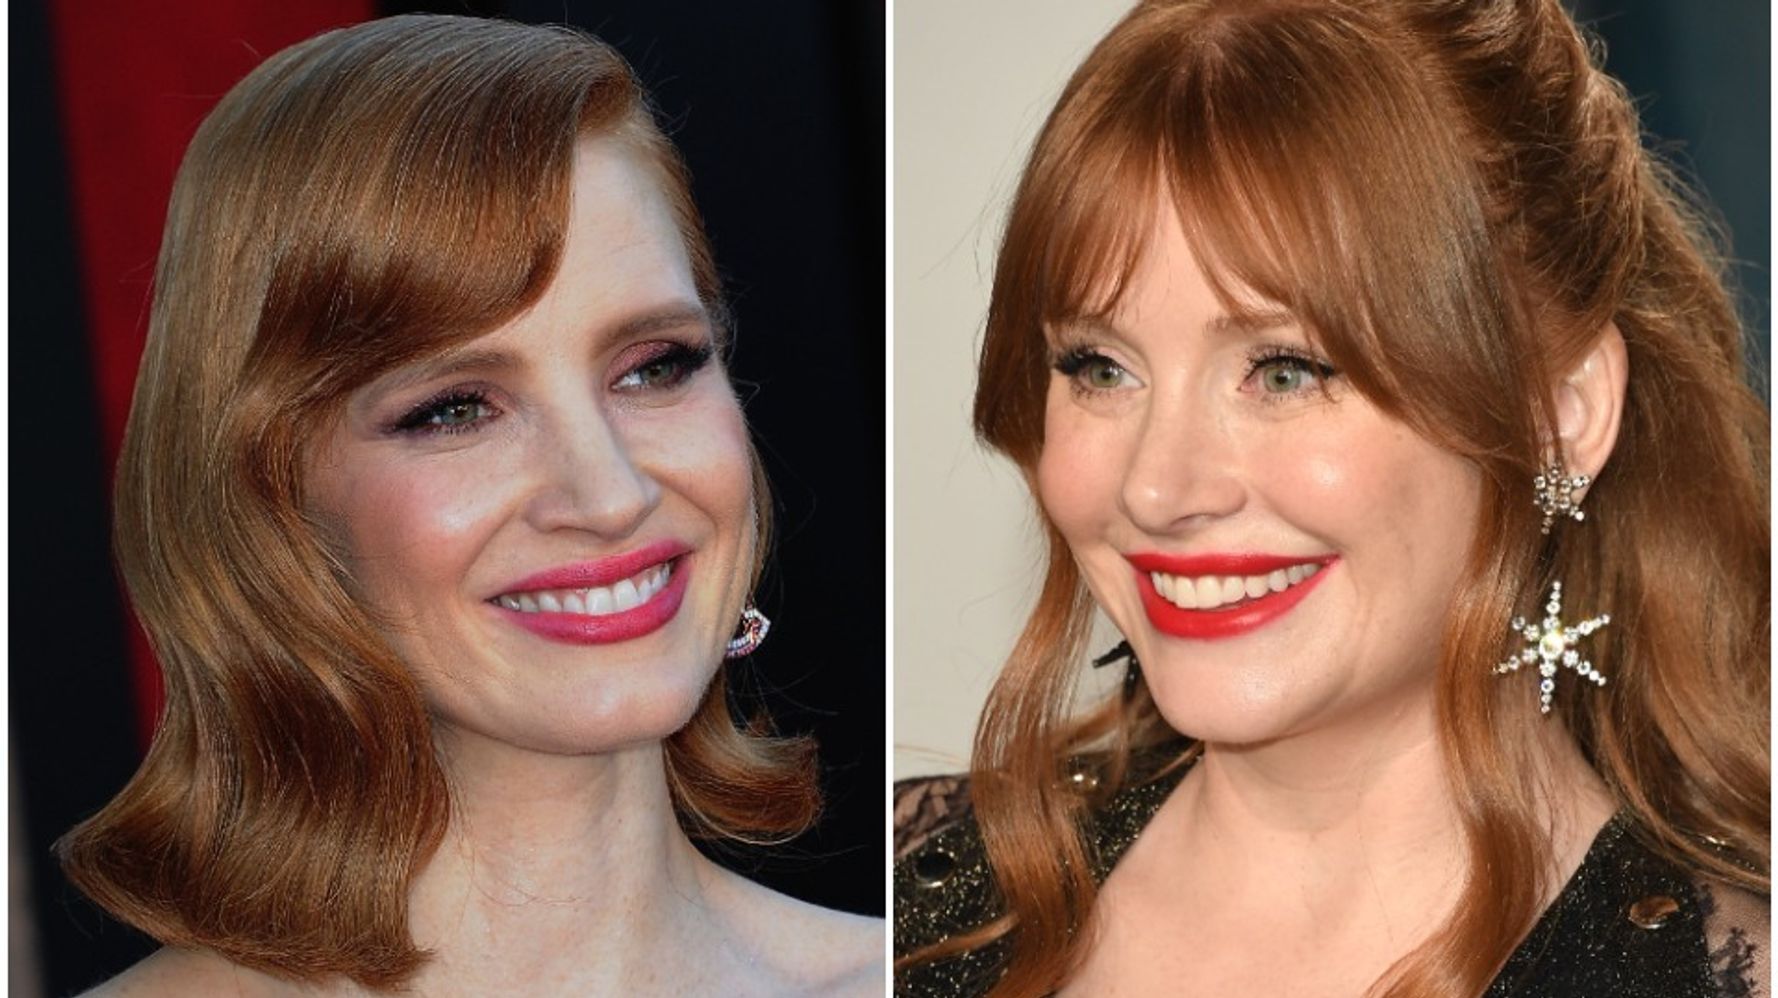 Jessica Chastain Uses TikTok To Remind Fans She's Not Bryce Dallas Howard